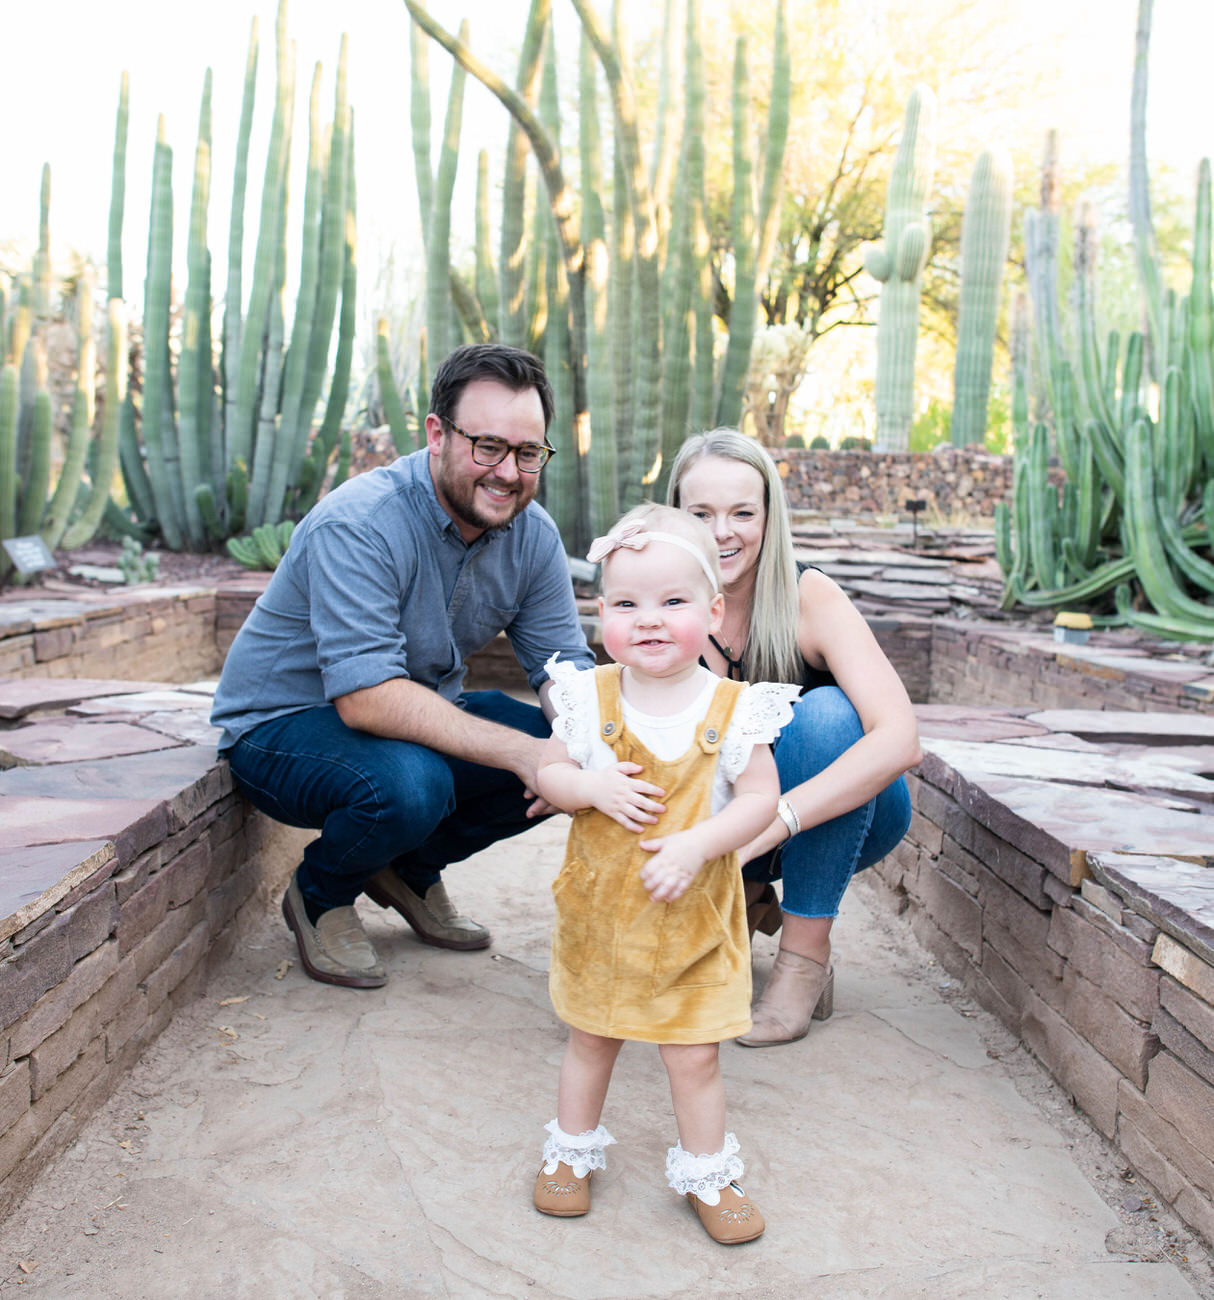 A family portrait with a man in a gray shirt, a woman in a black top, and their baby in the center, all smiling in front of a cactus backdrop at the Desert Botanical Garden in Arizona